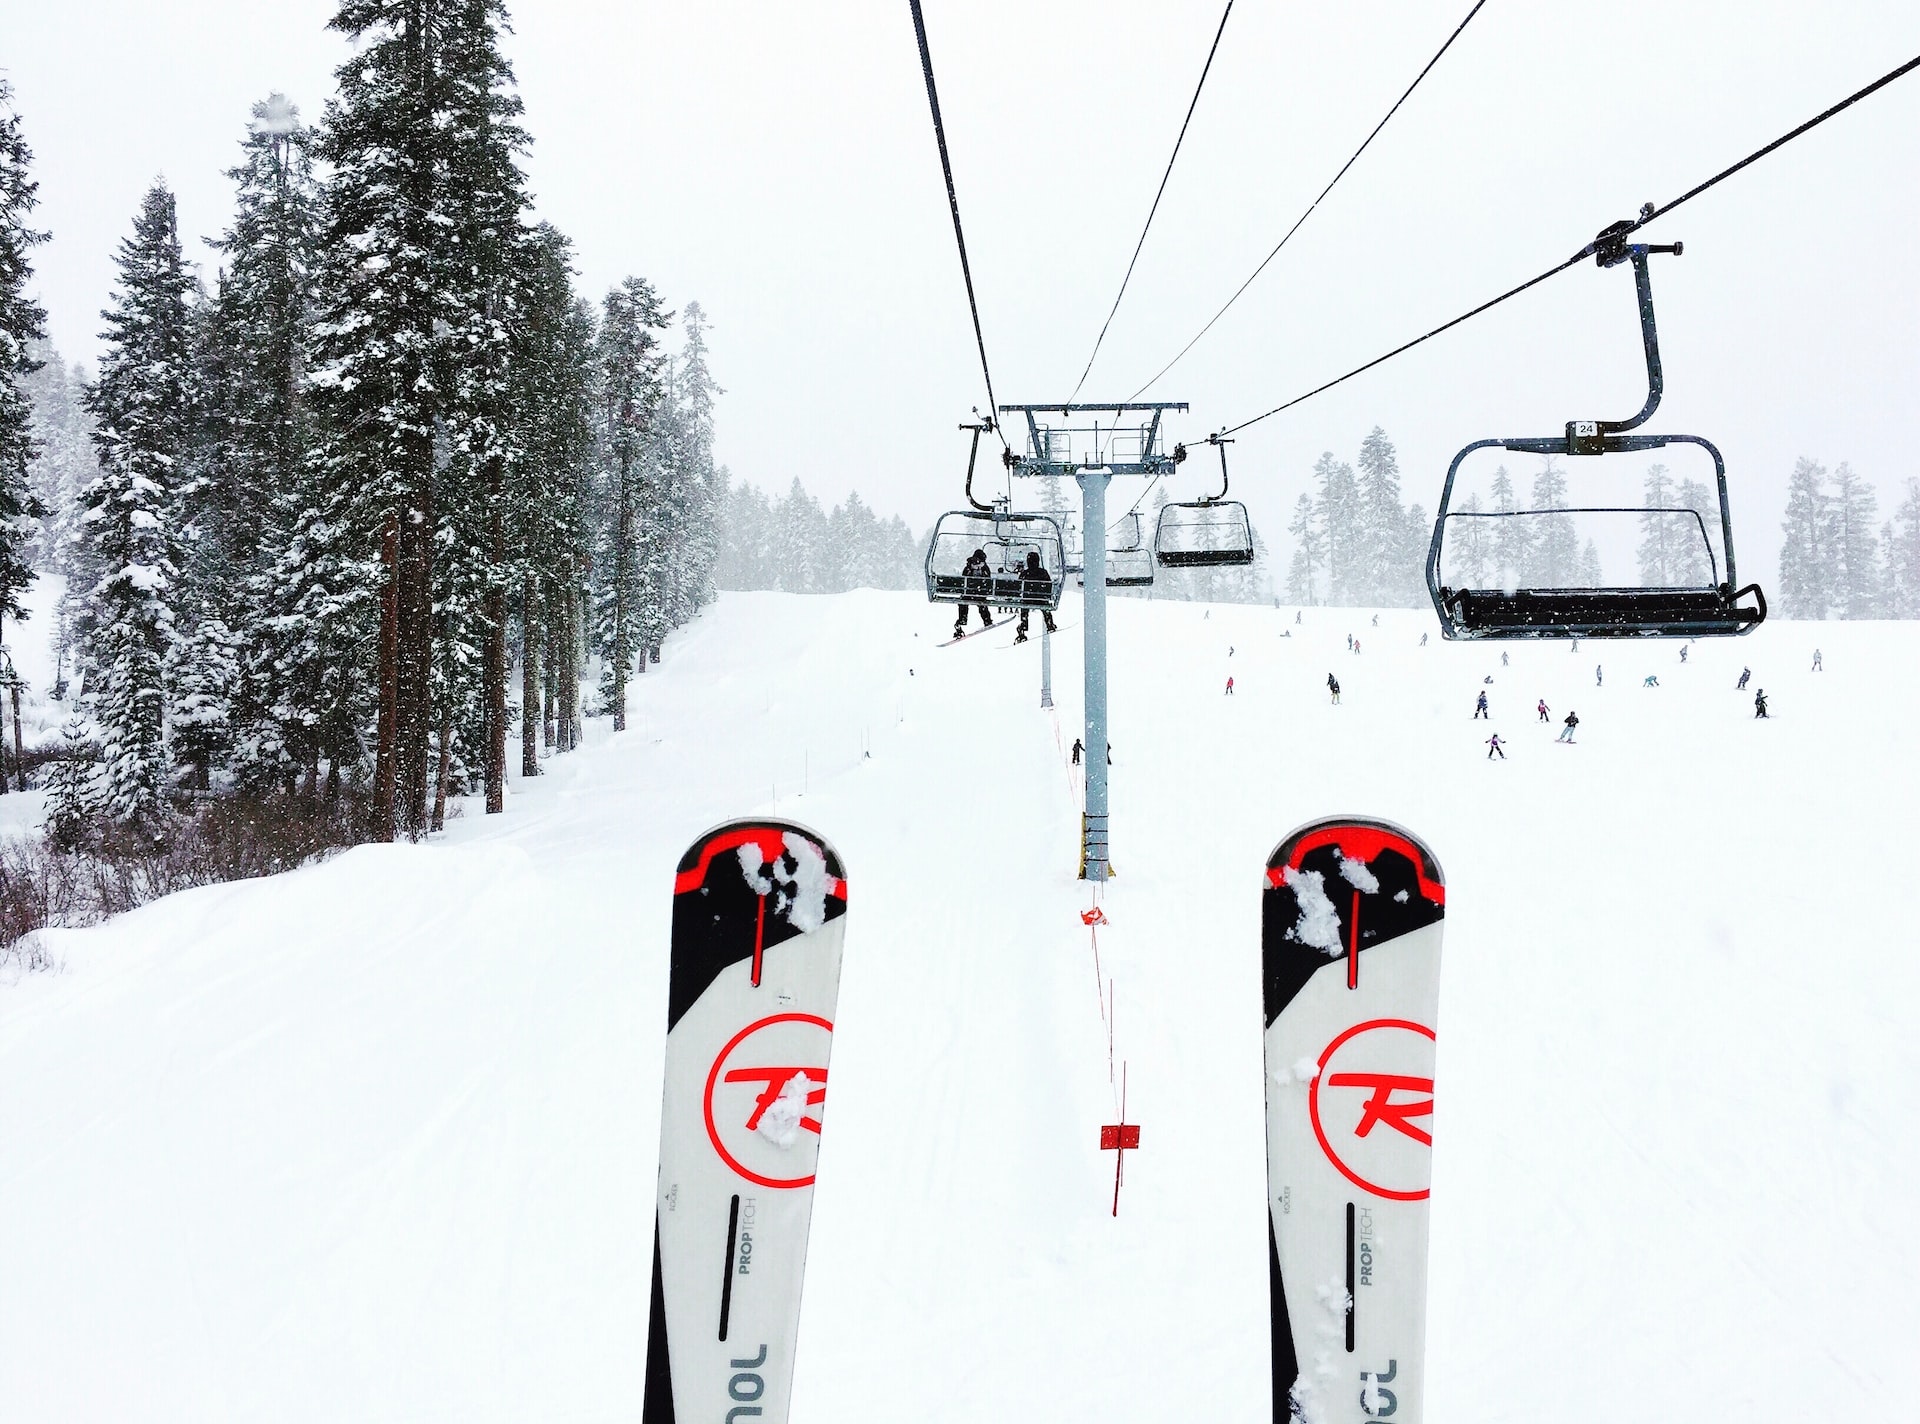 A pair of skis on a ski lift going up the mountain.